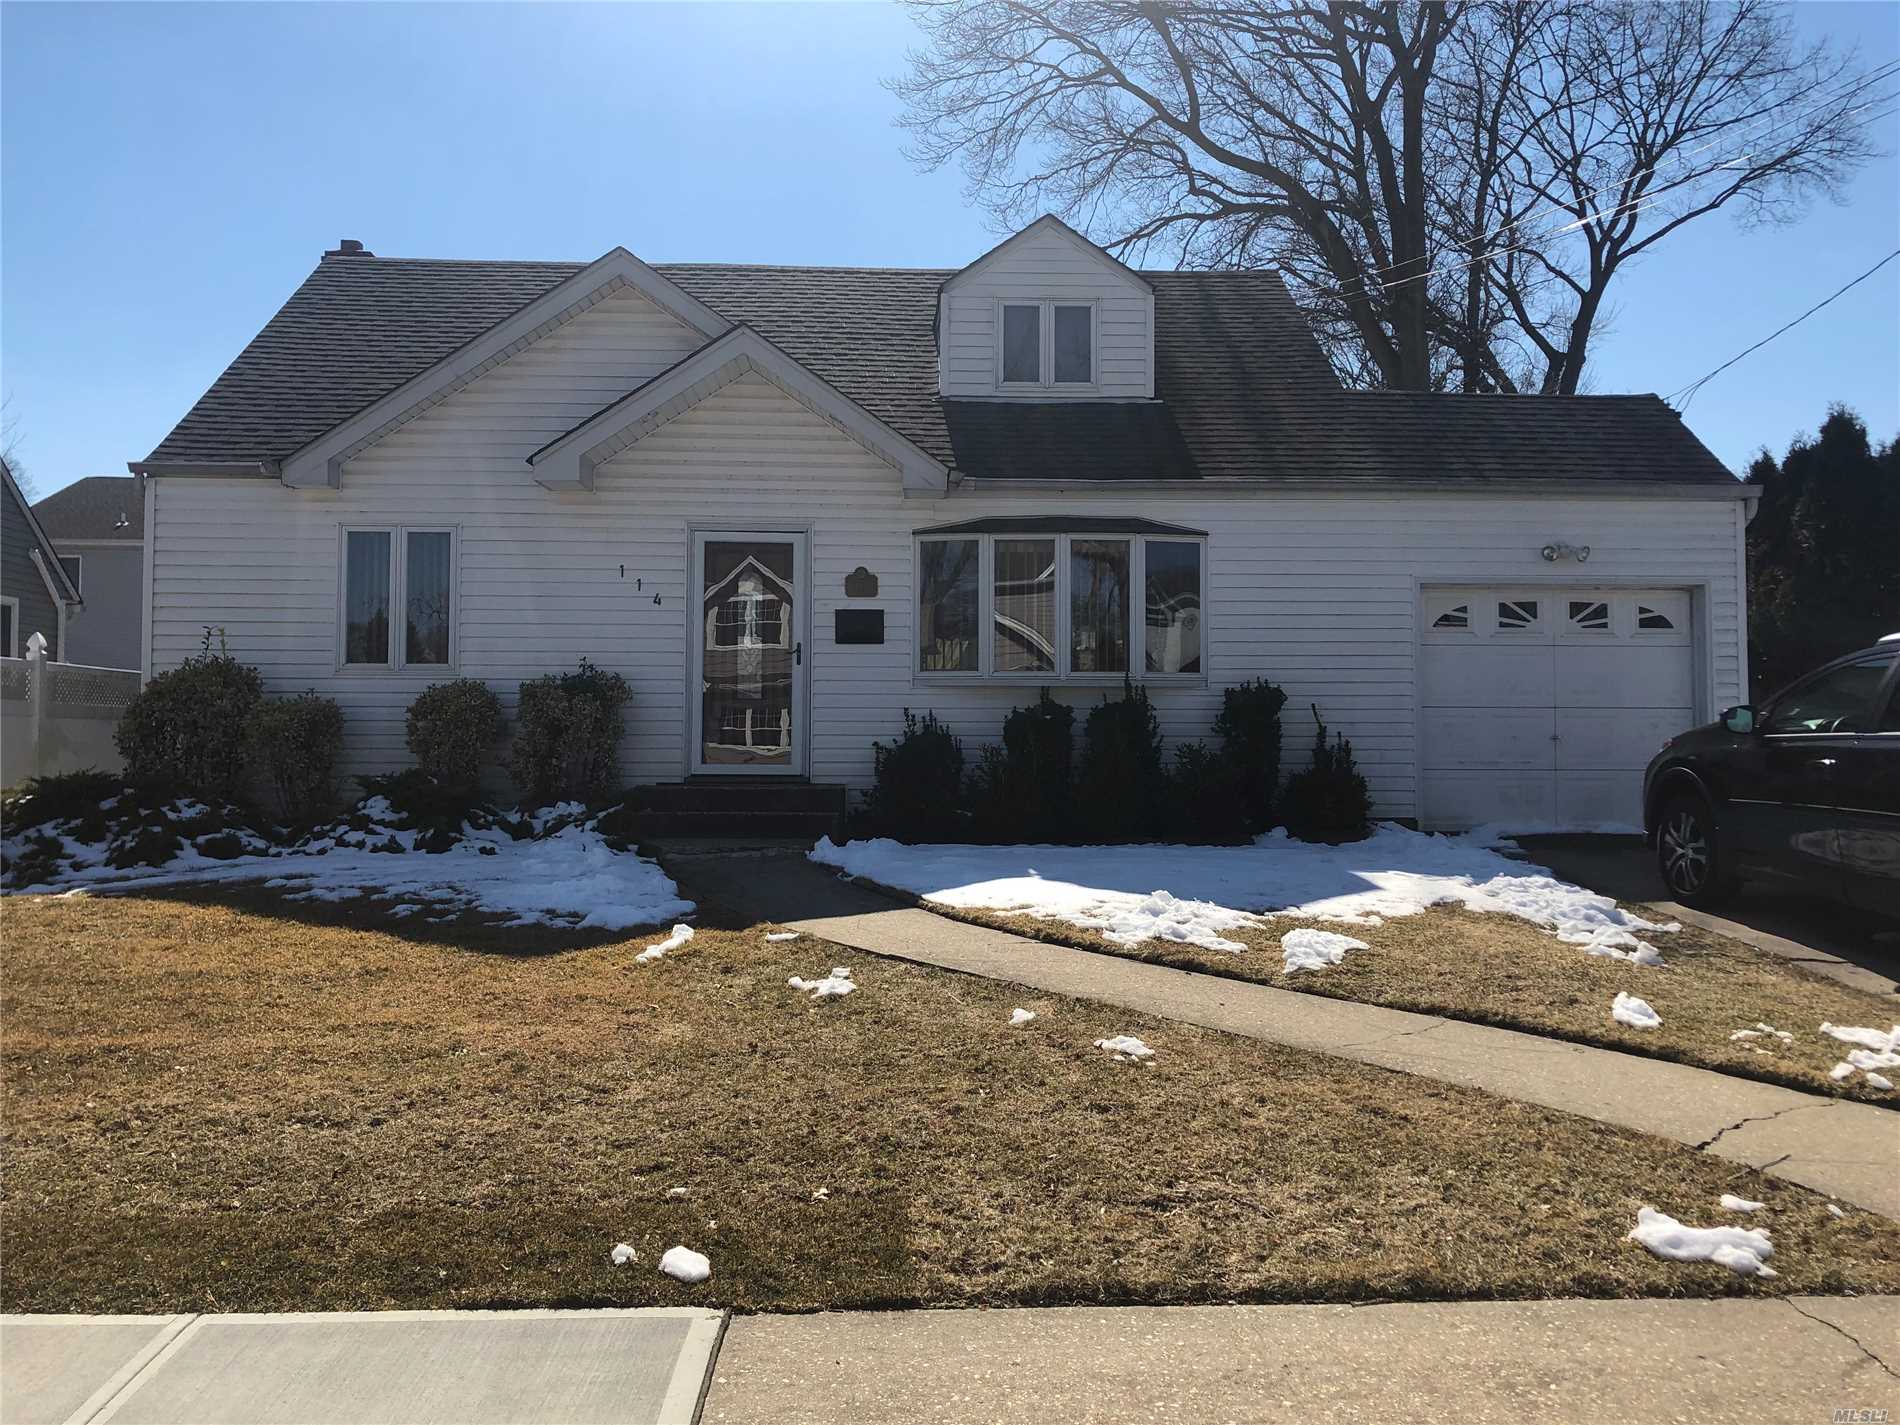 Great Location , walk to village. House needs work and is selling ASIS. roof approx. 5 years, new front door,  new carpet and flooring in kitchen. Pool is a gift